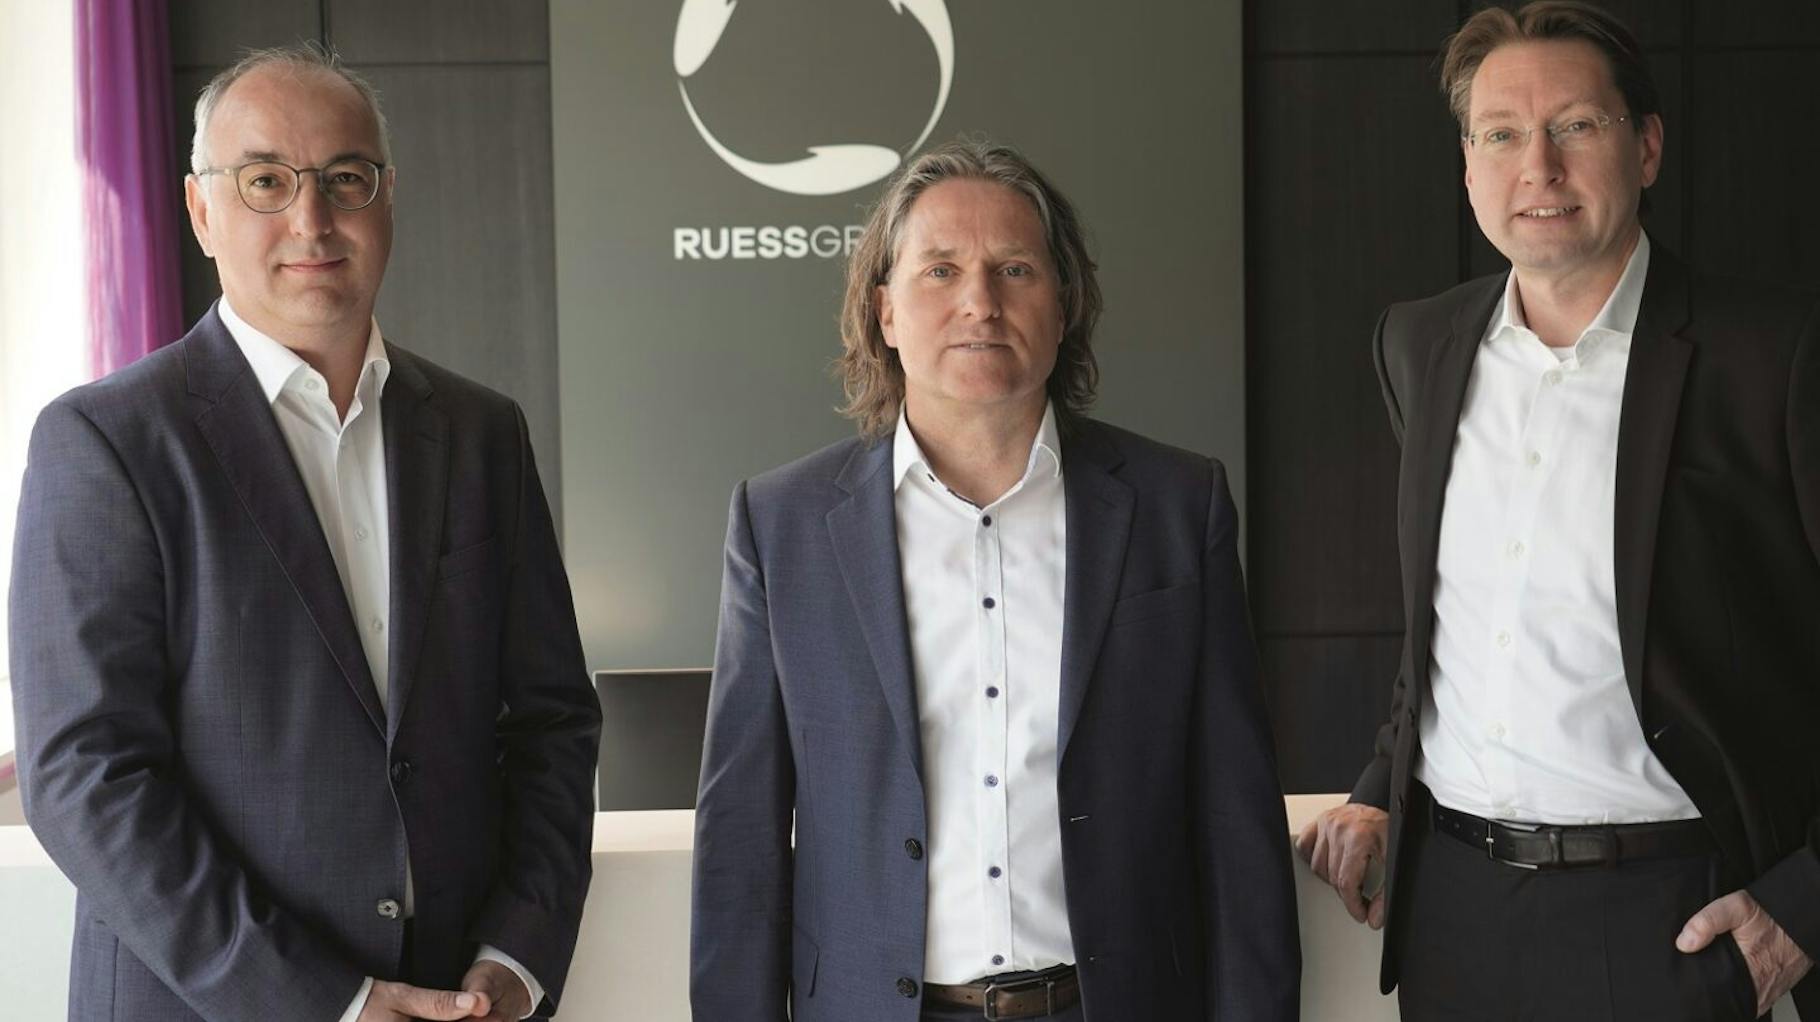 Management of the newly expanded Ruess Group (from left to right): Rafael Rahn, Steffen Rueß, Markus Rahner